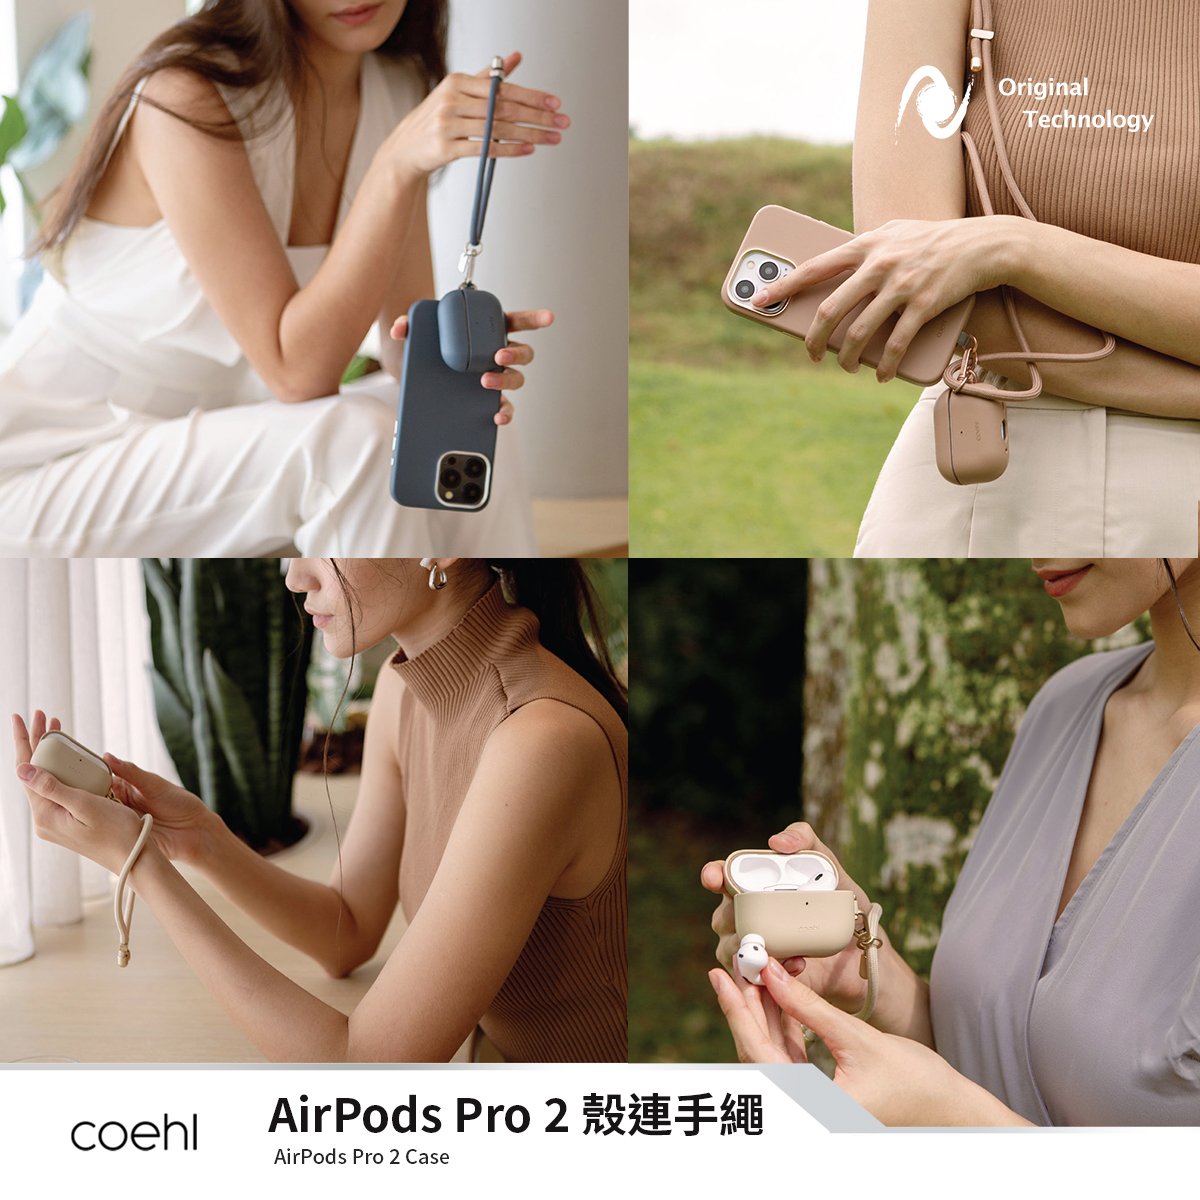 Coehl haven AirPods Pro 2 Case with Strap - 女生必入，全新柔和色系